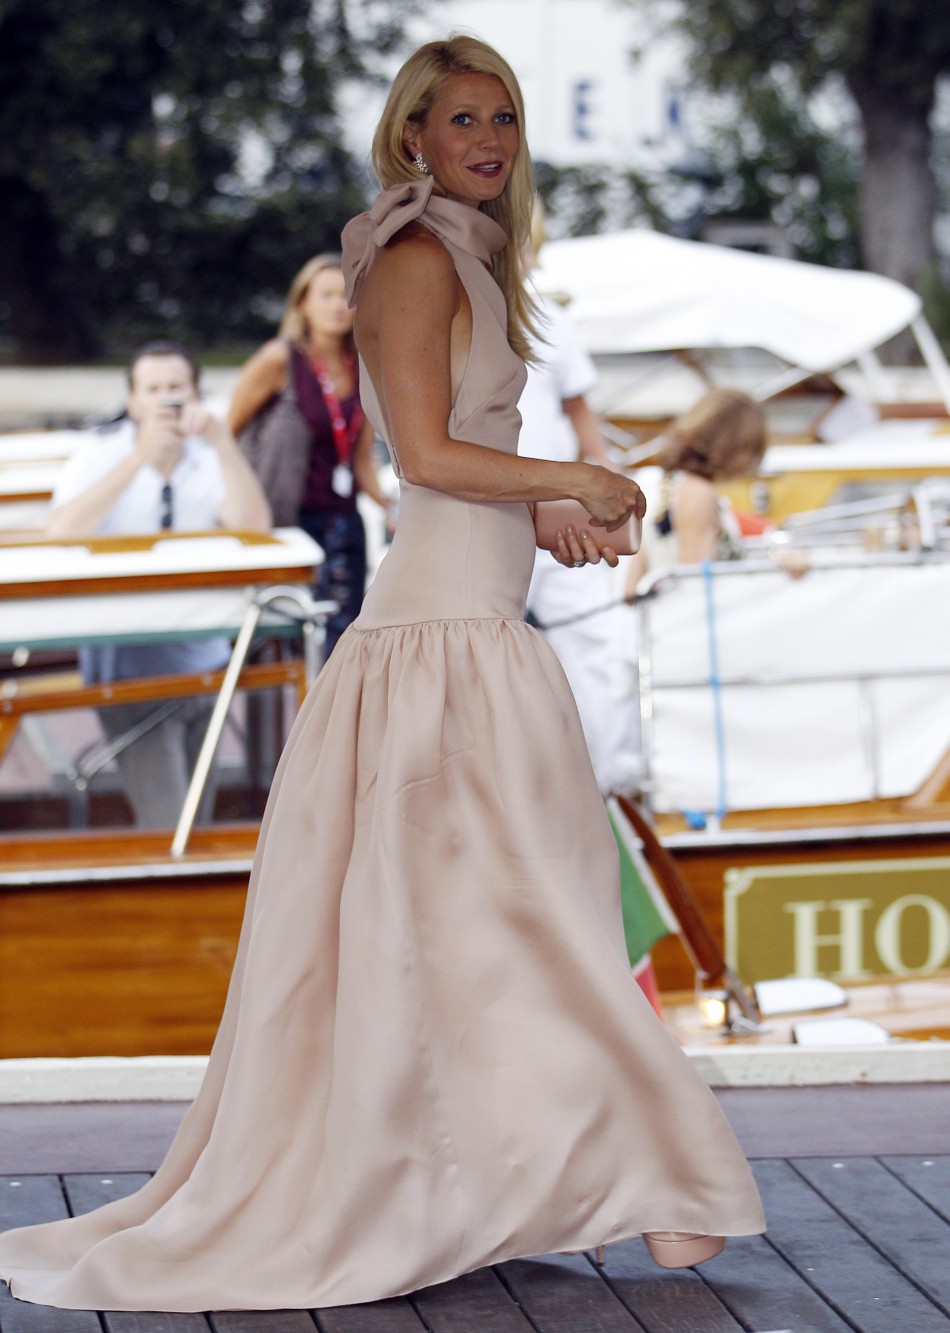 Actress Paltrow arrives on the quotContagionquot red carpet at the 68th Venice Film Festival